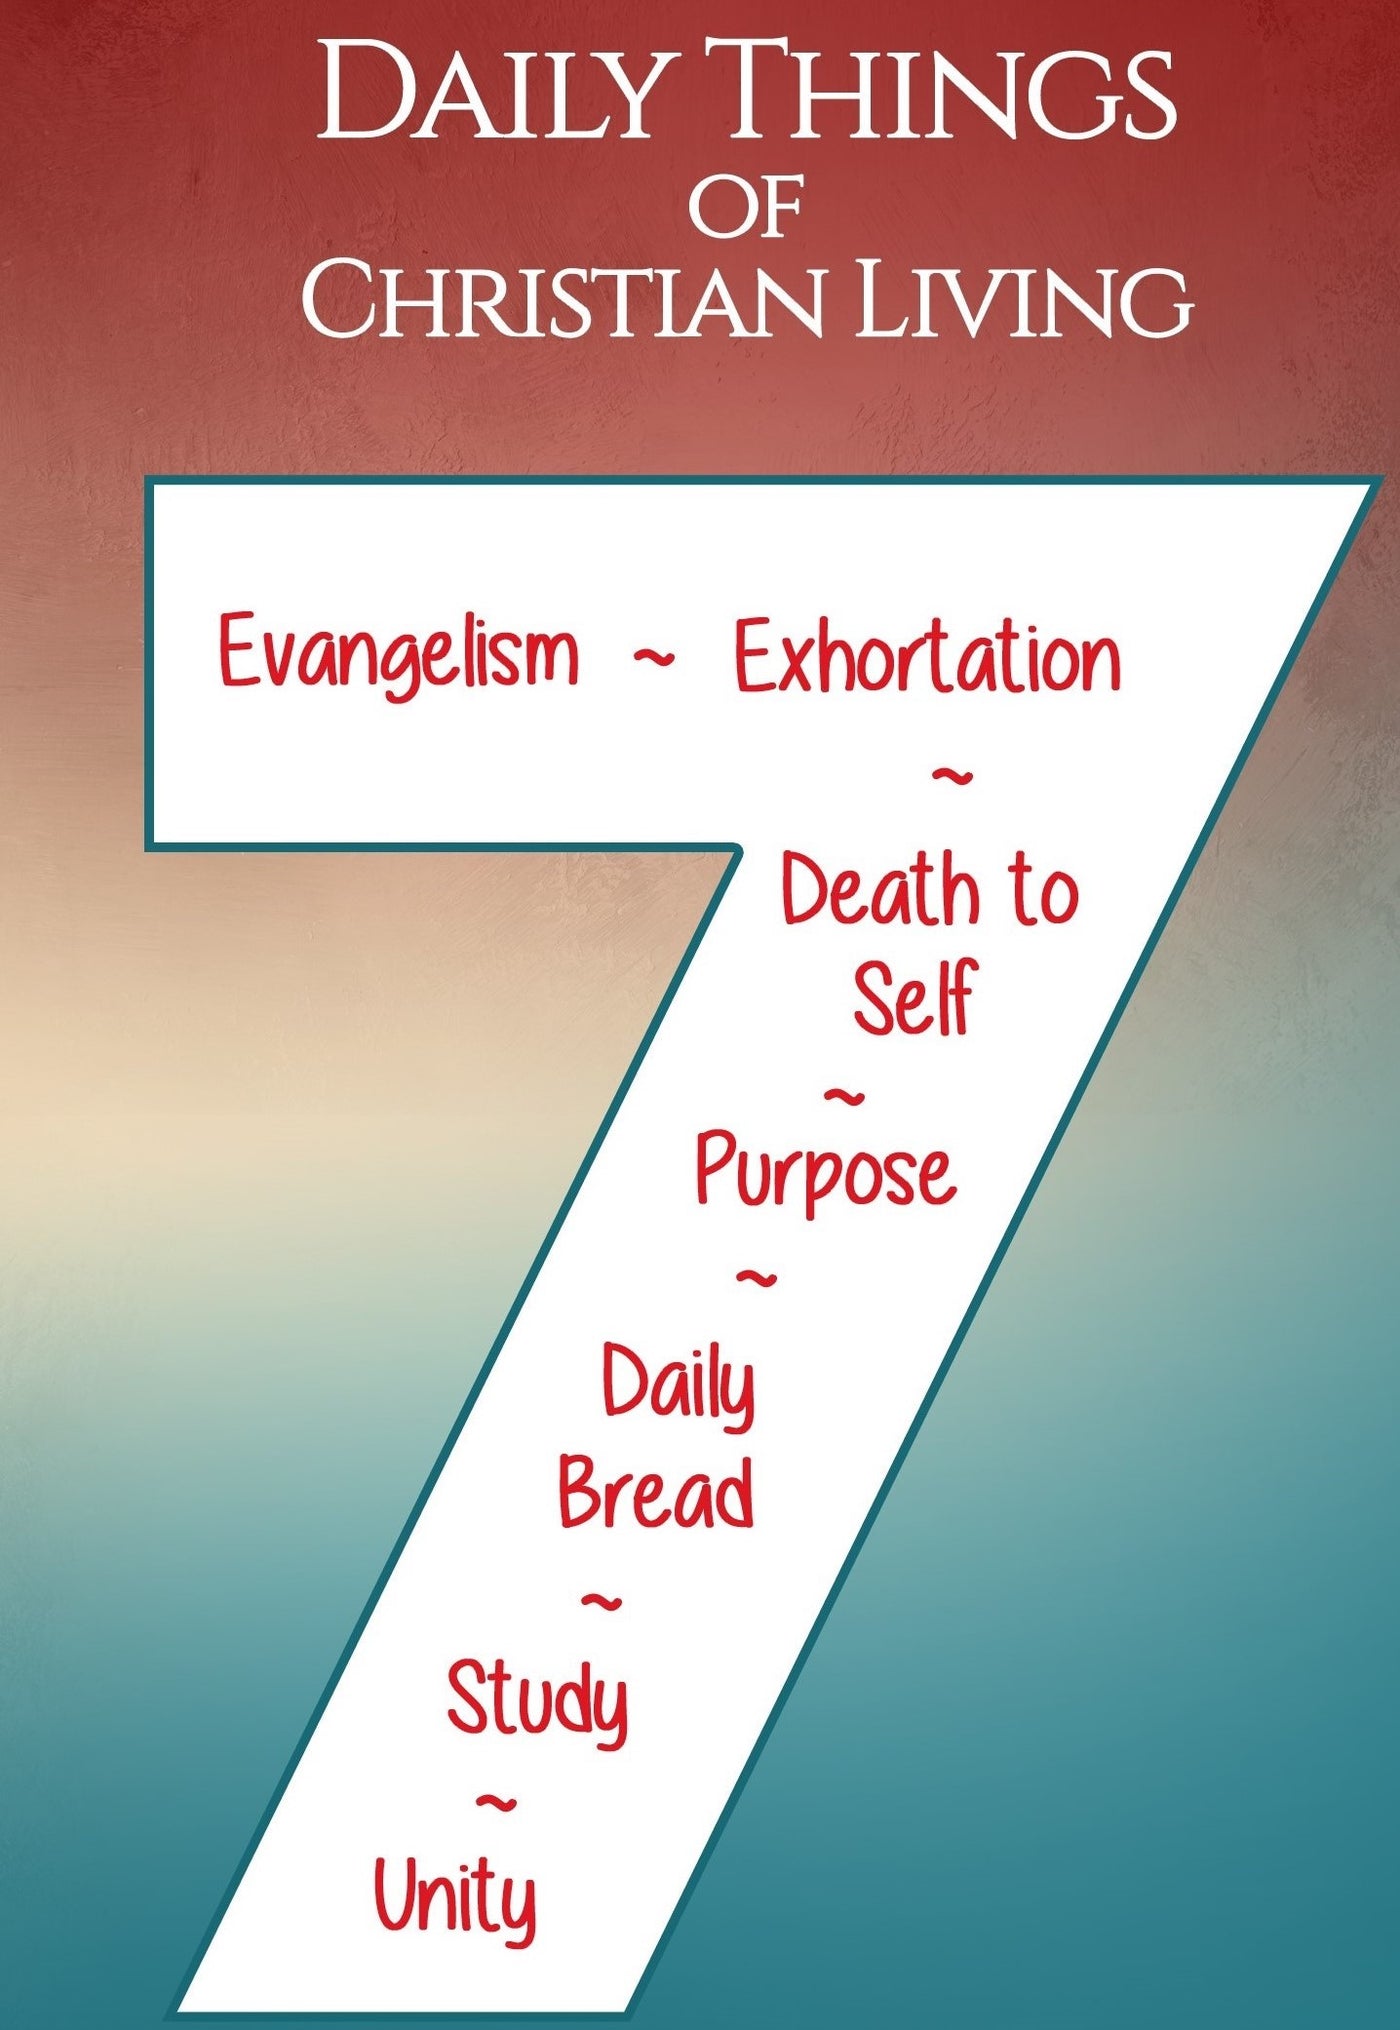 Daily Purpose (Review Chapter from Daily Things of Christian Living)